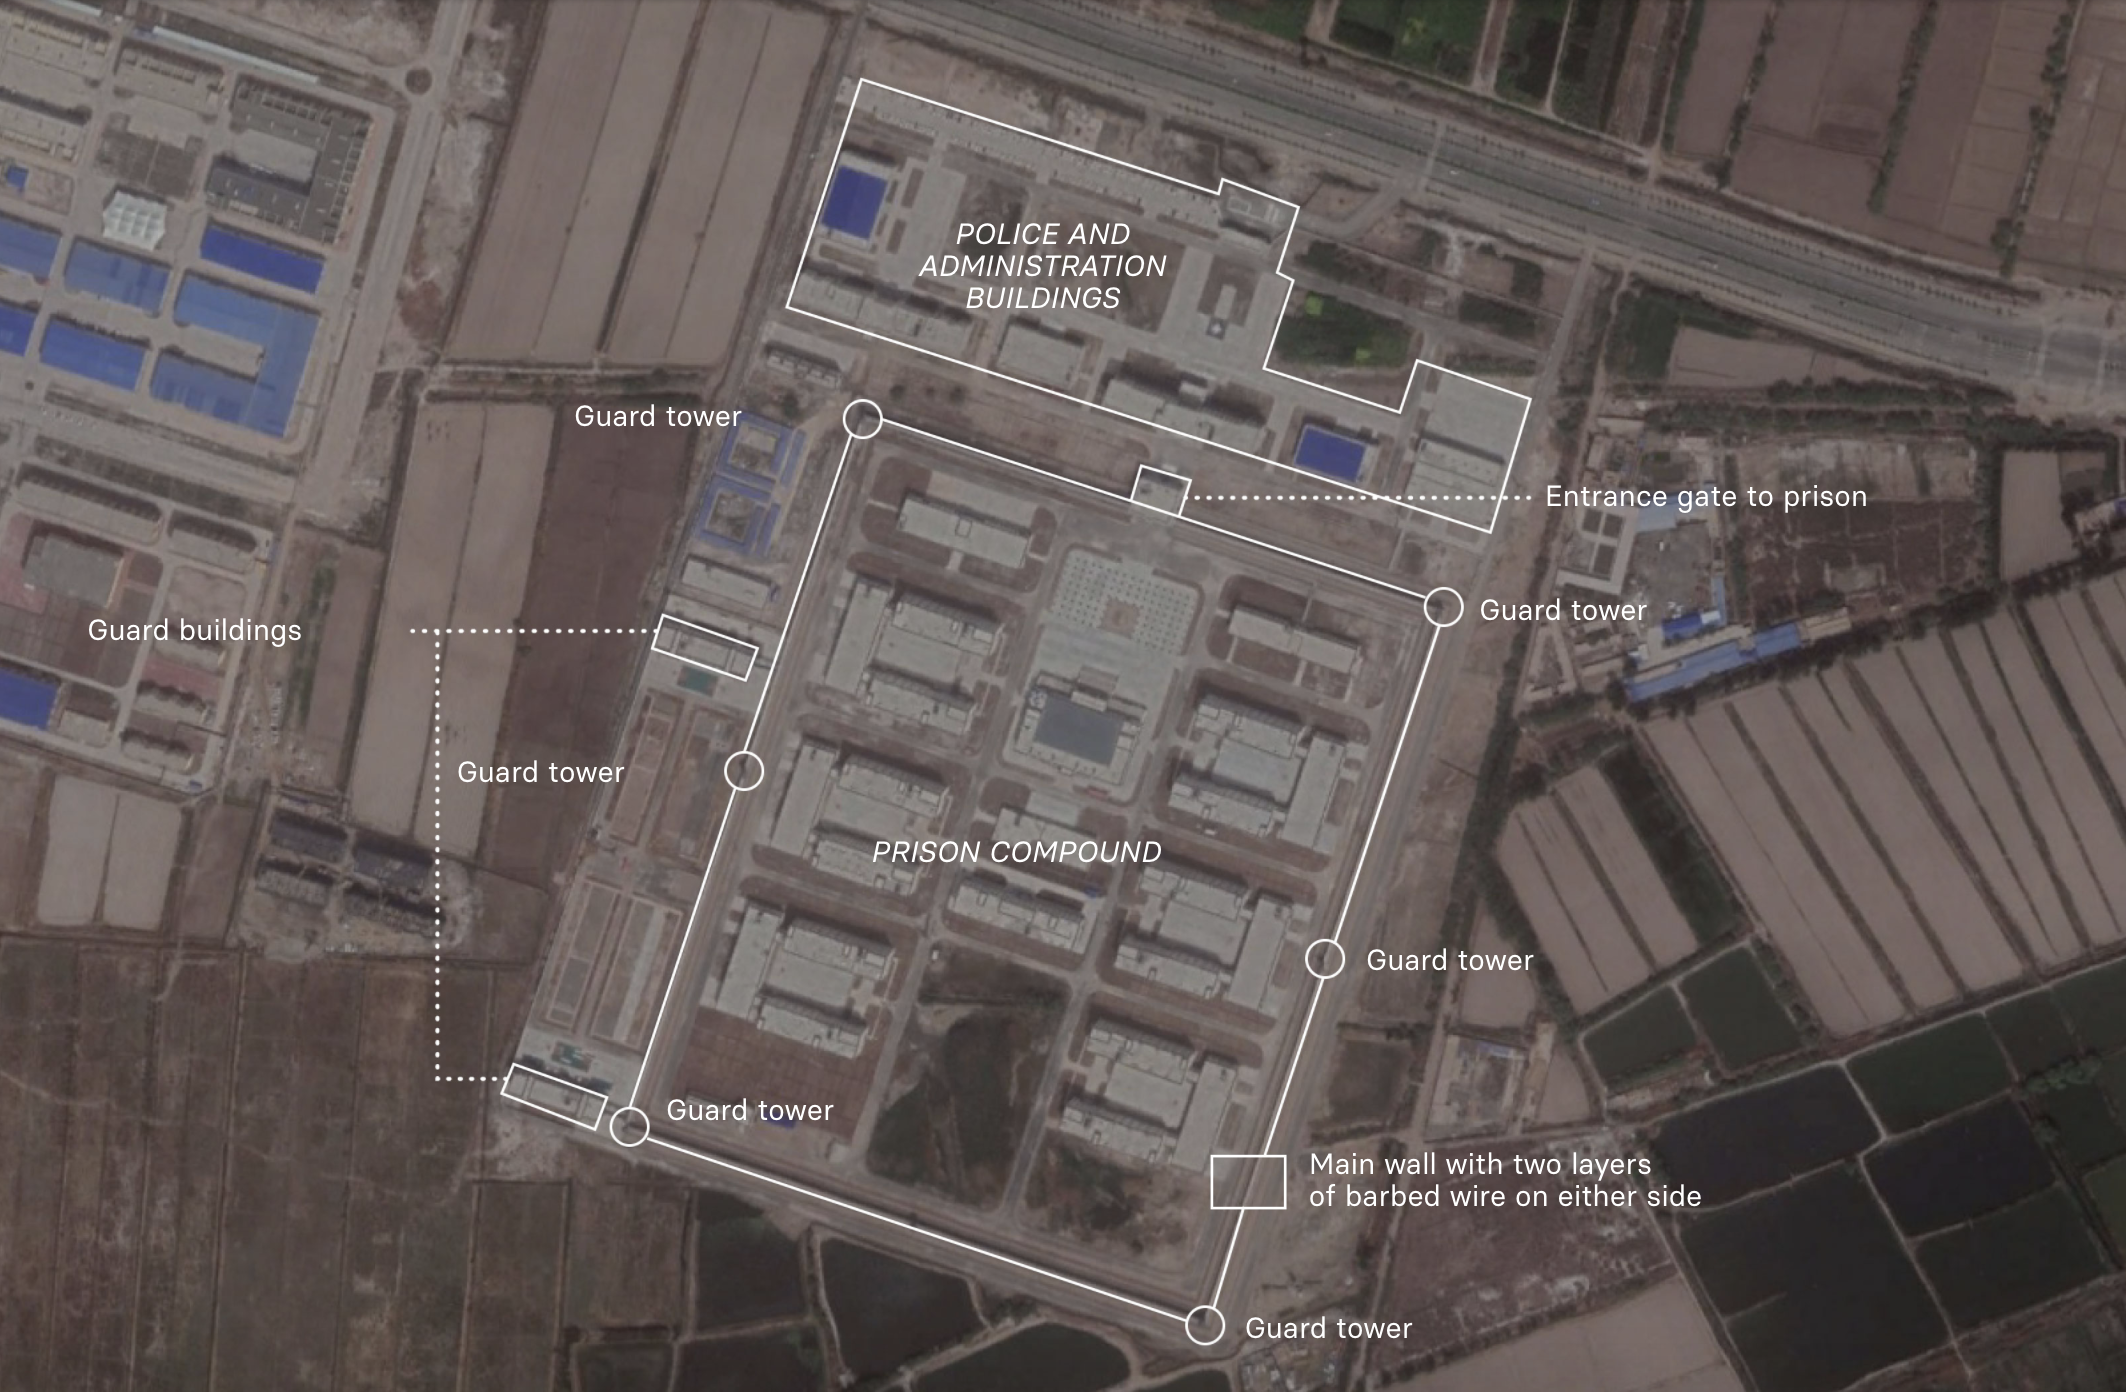 The camp at Shufu, in Xinjiang, seen by satellite on April 26, 2020. Image courtesy of BuzzFeed News/Google Maps. China, 2020.